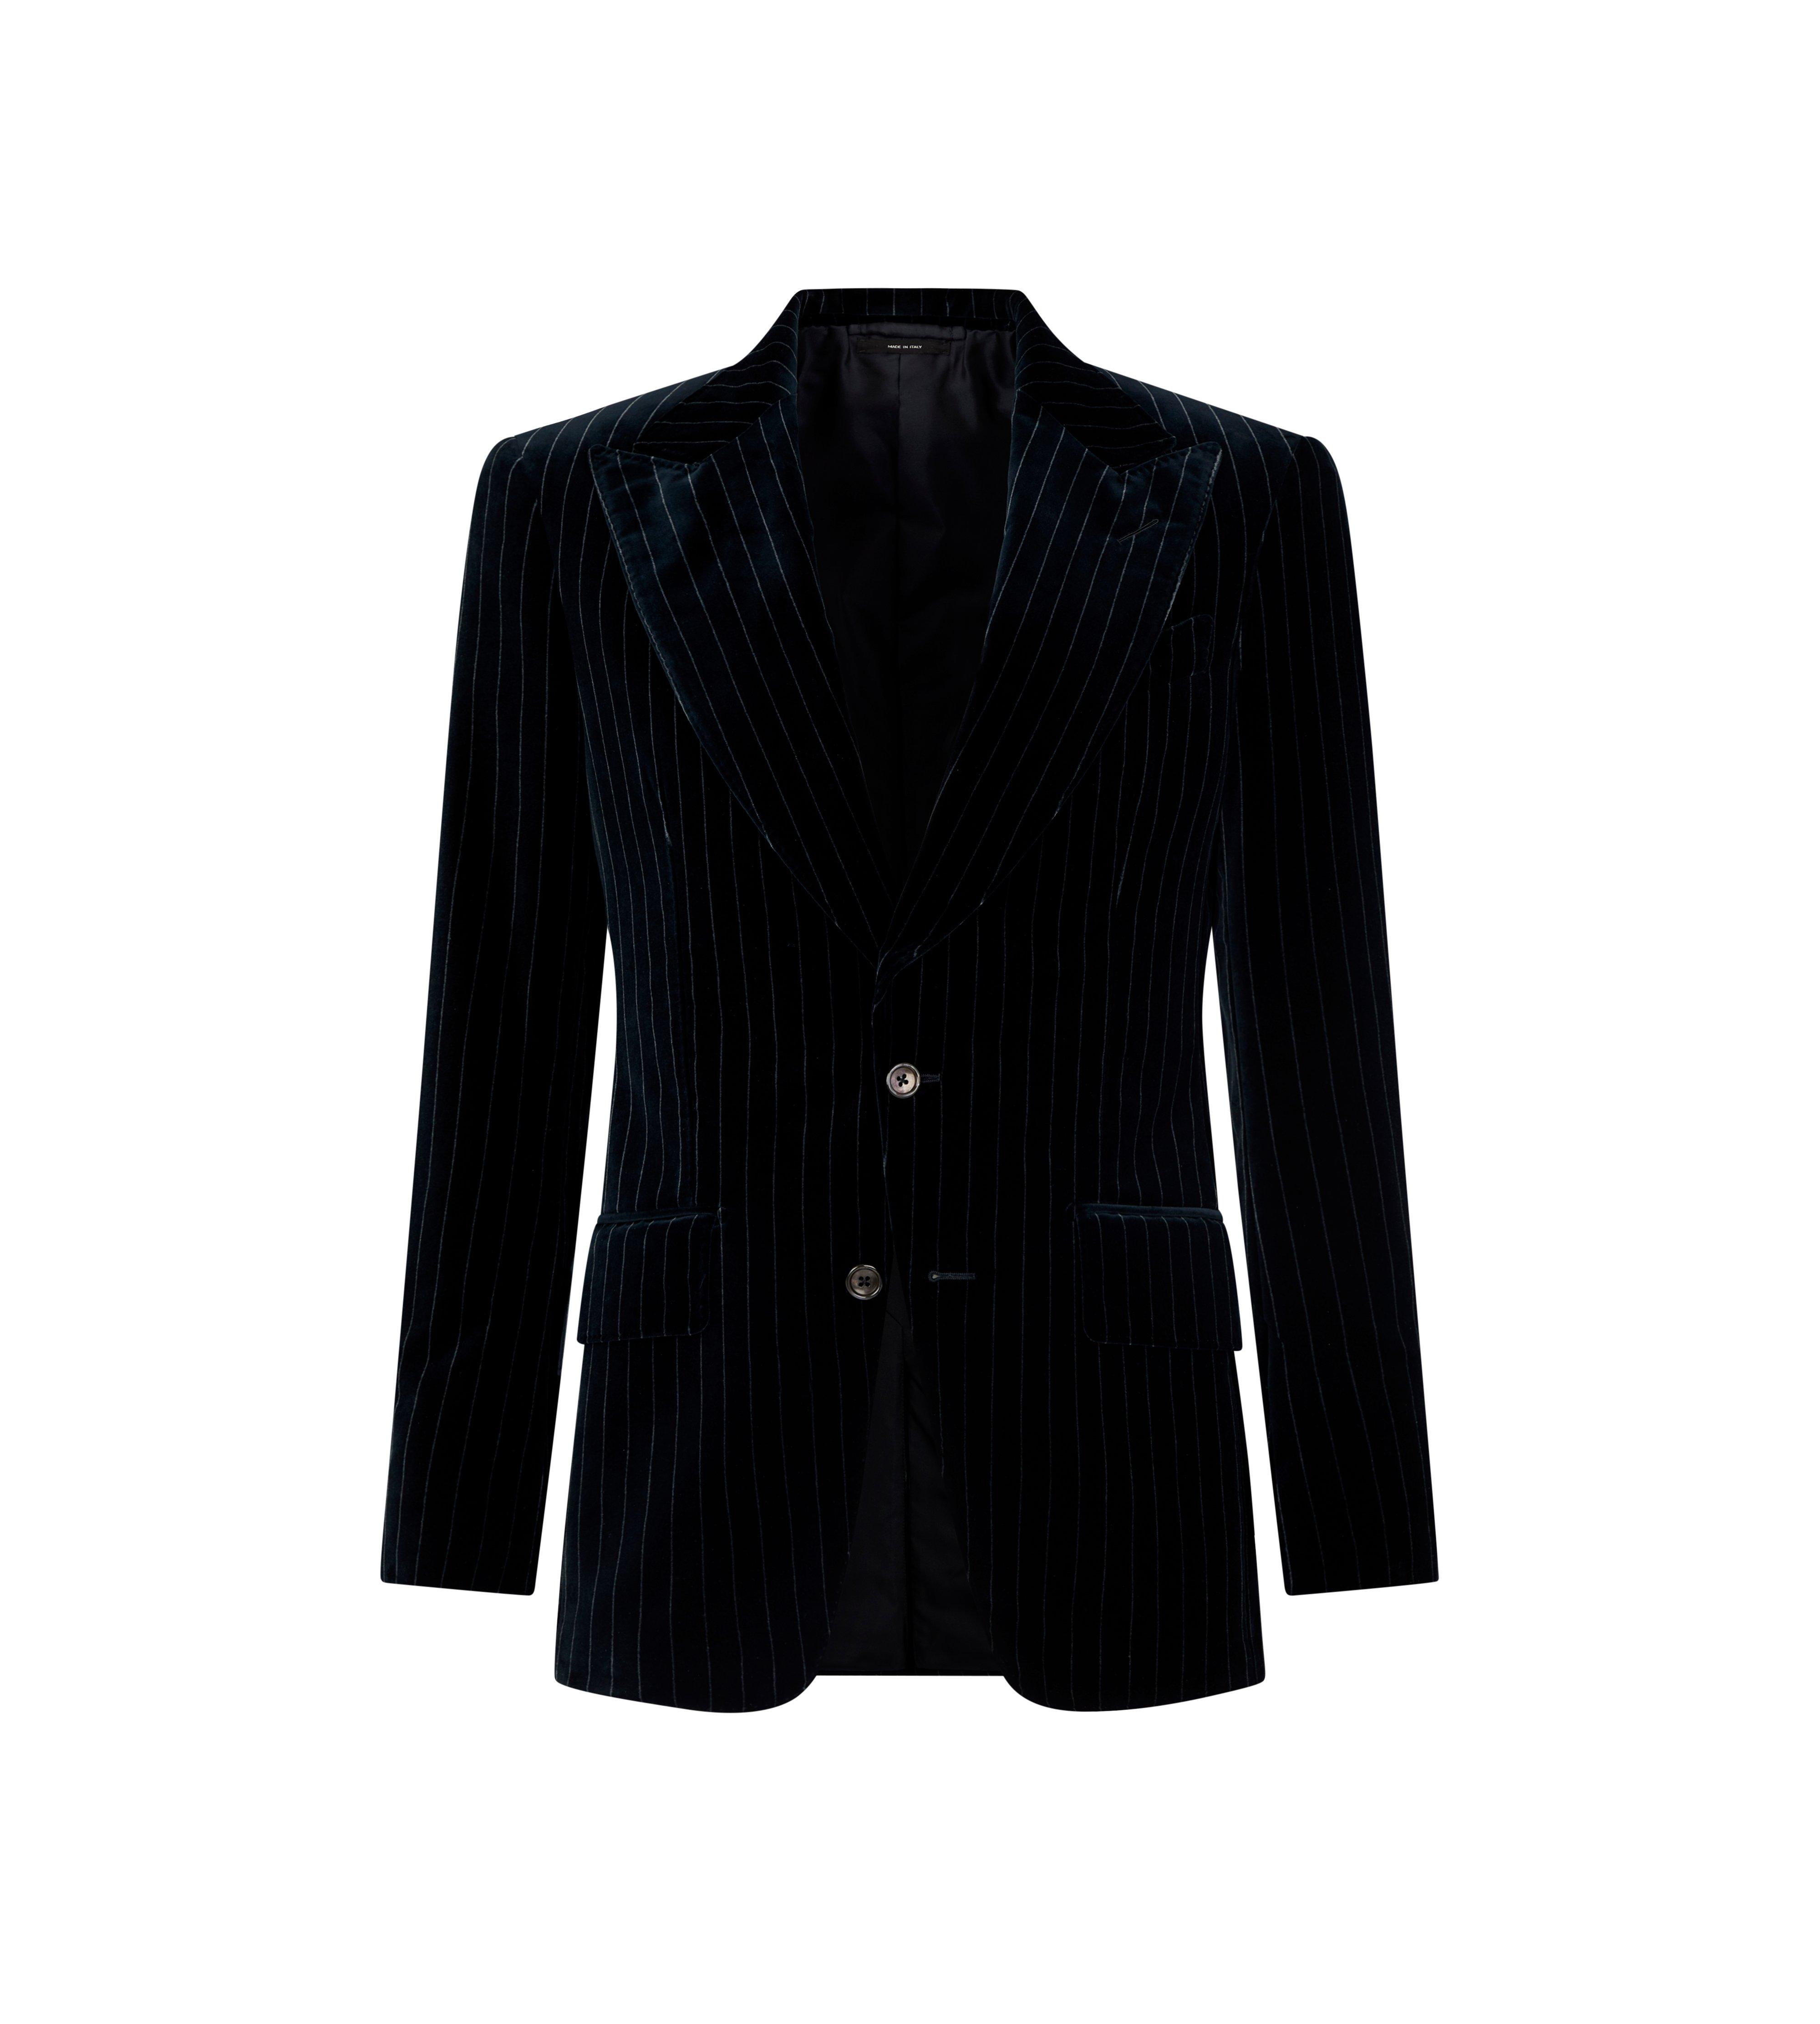 Tom Ford Photostream  Tom ford suit, Tom ford men, Mens outfits